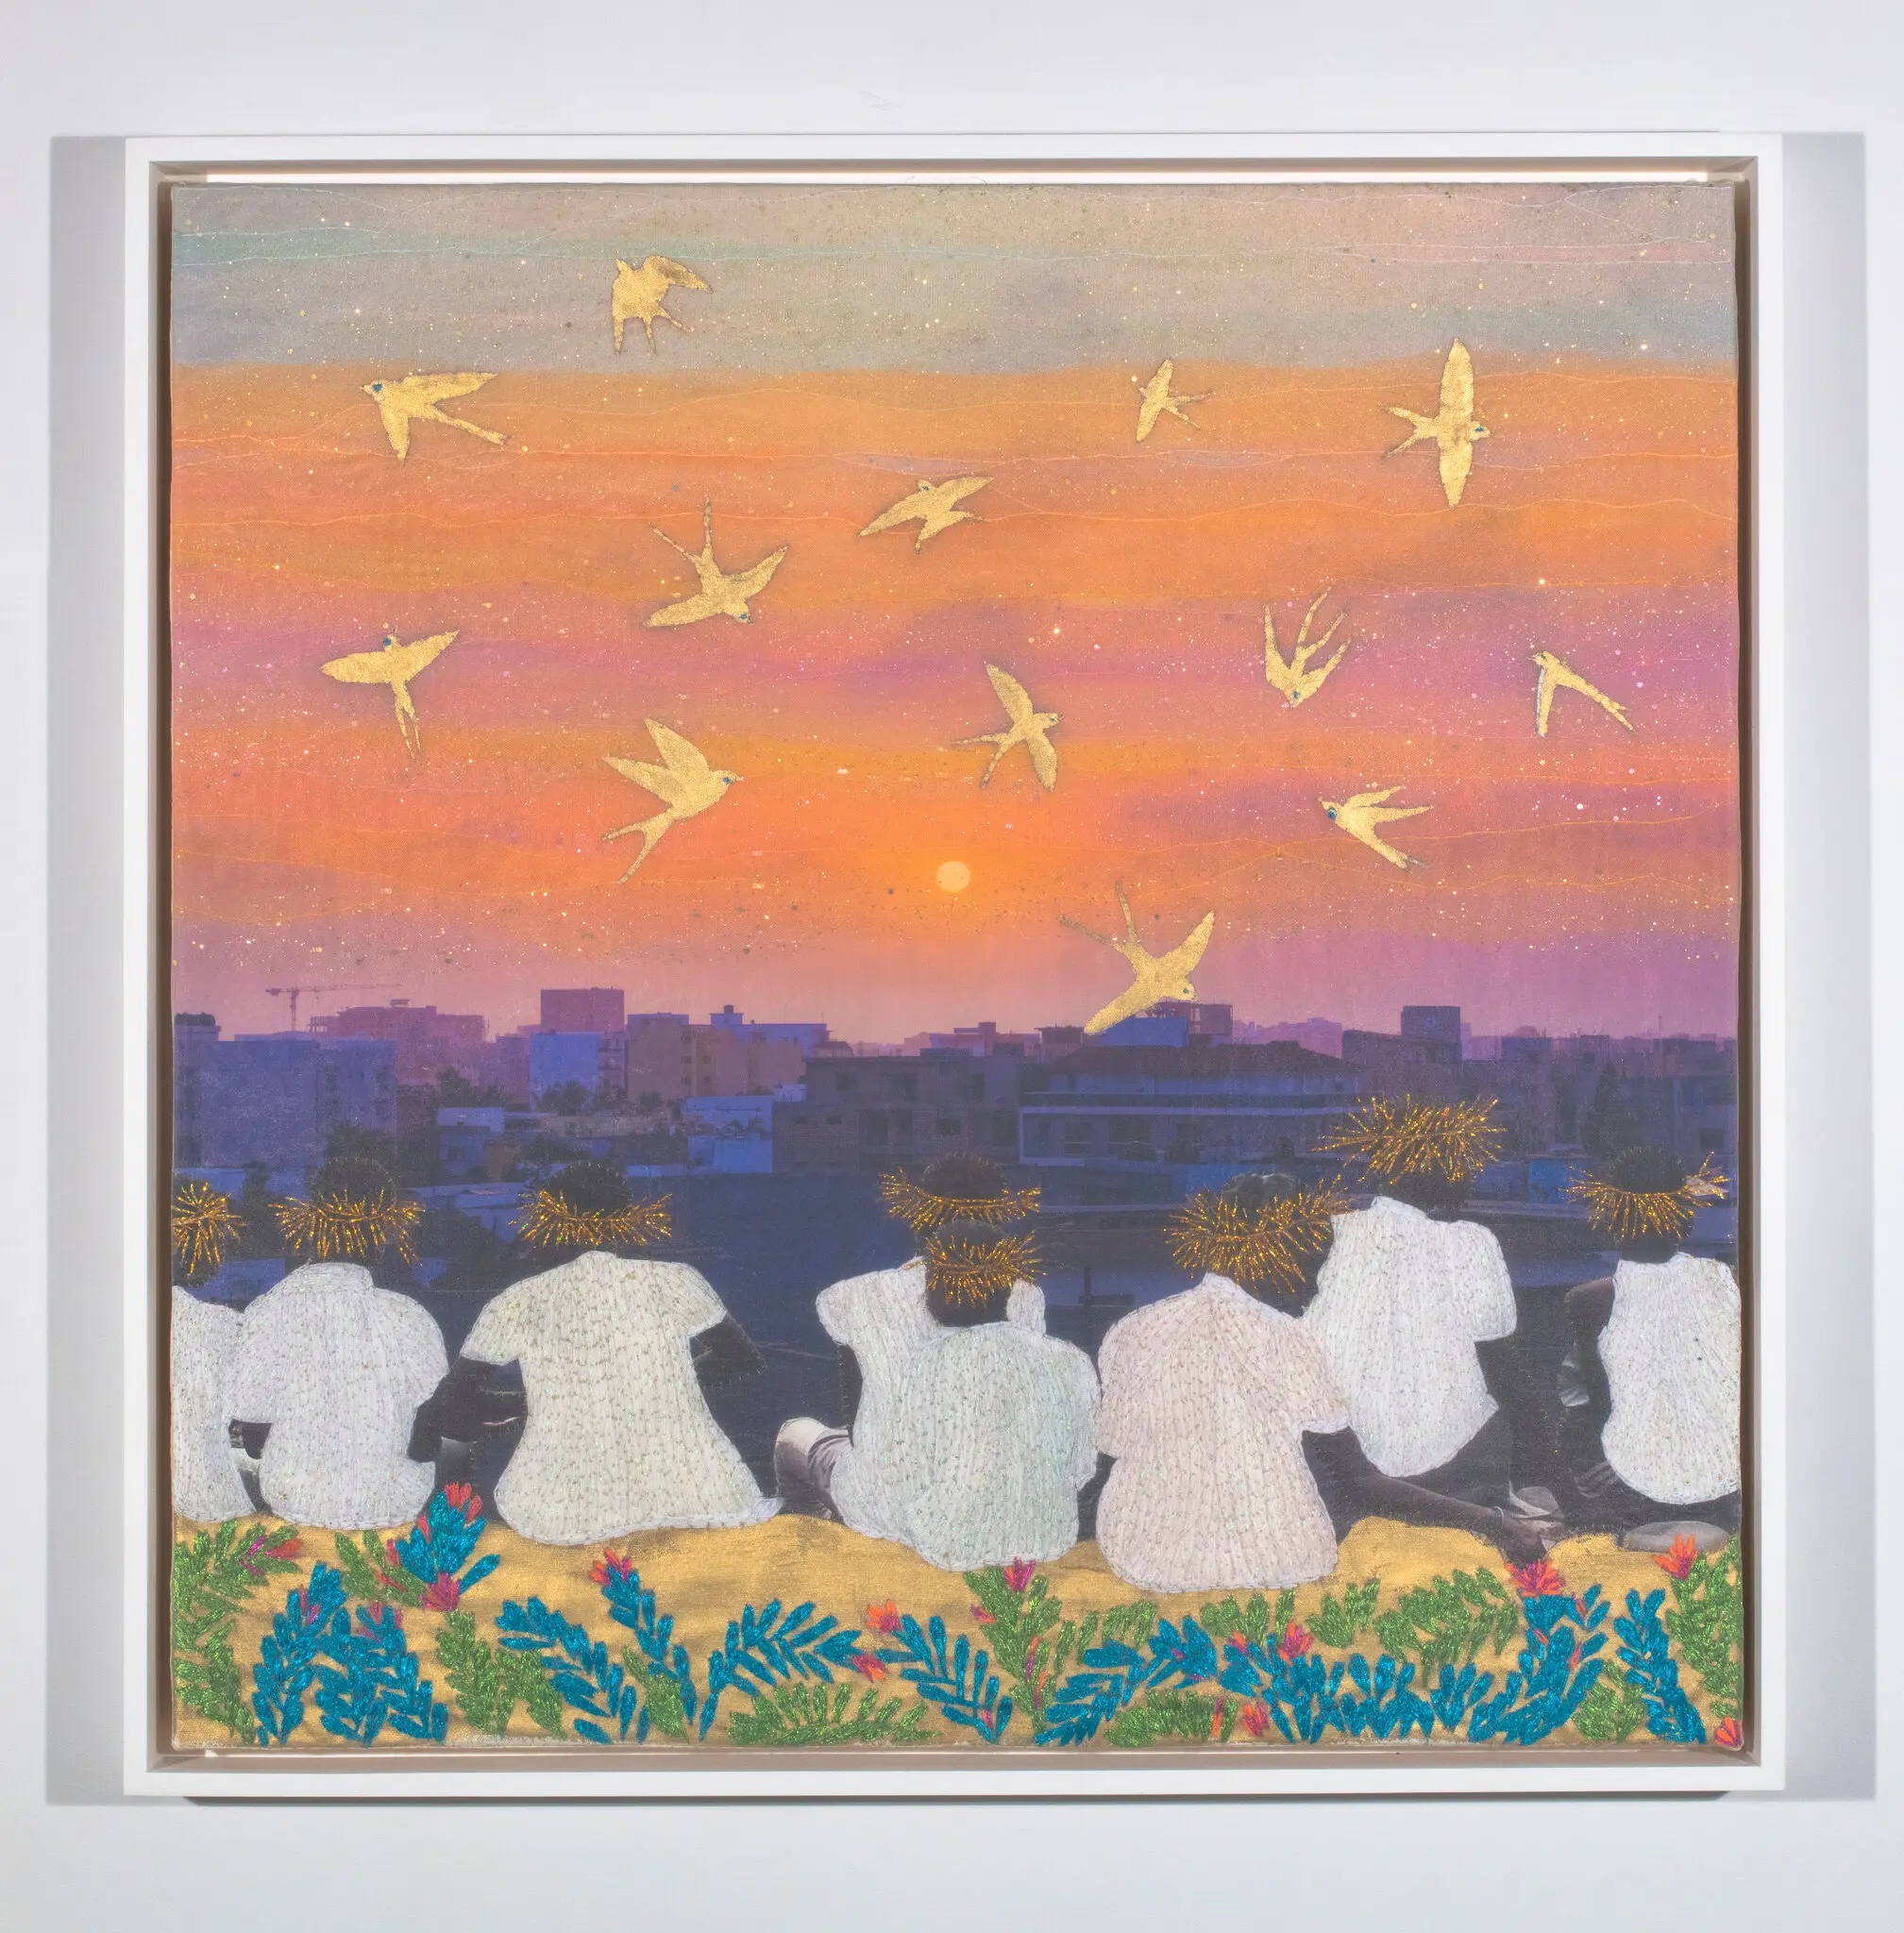 Joana Choumali’s “The Return of the Swallows” (2021). Courtesy of the artist and Sperone Westwater.